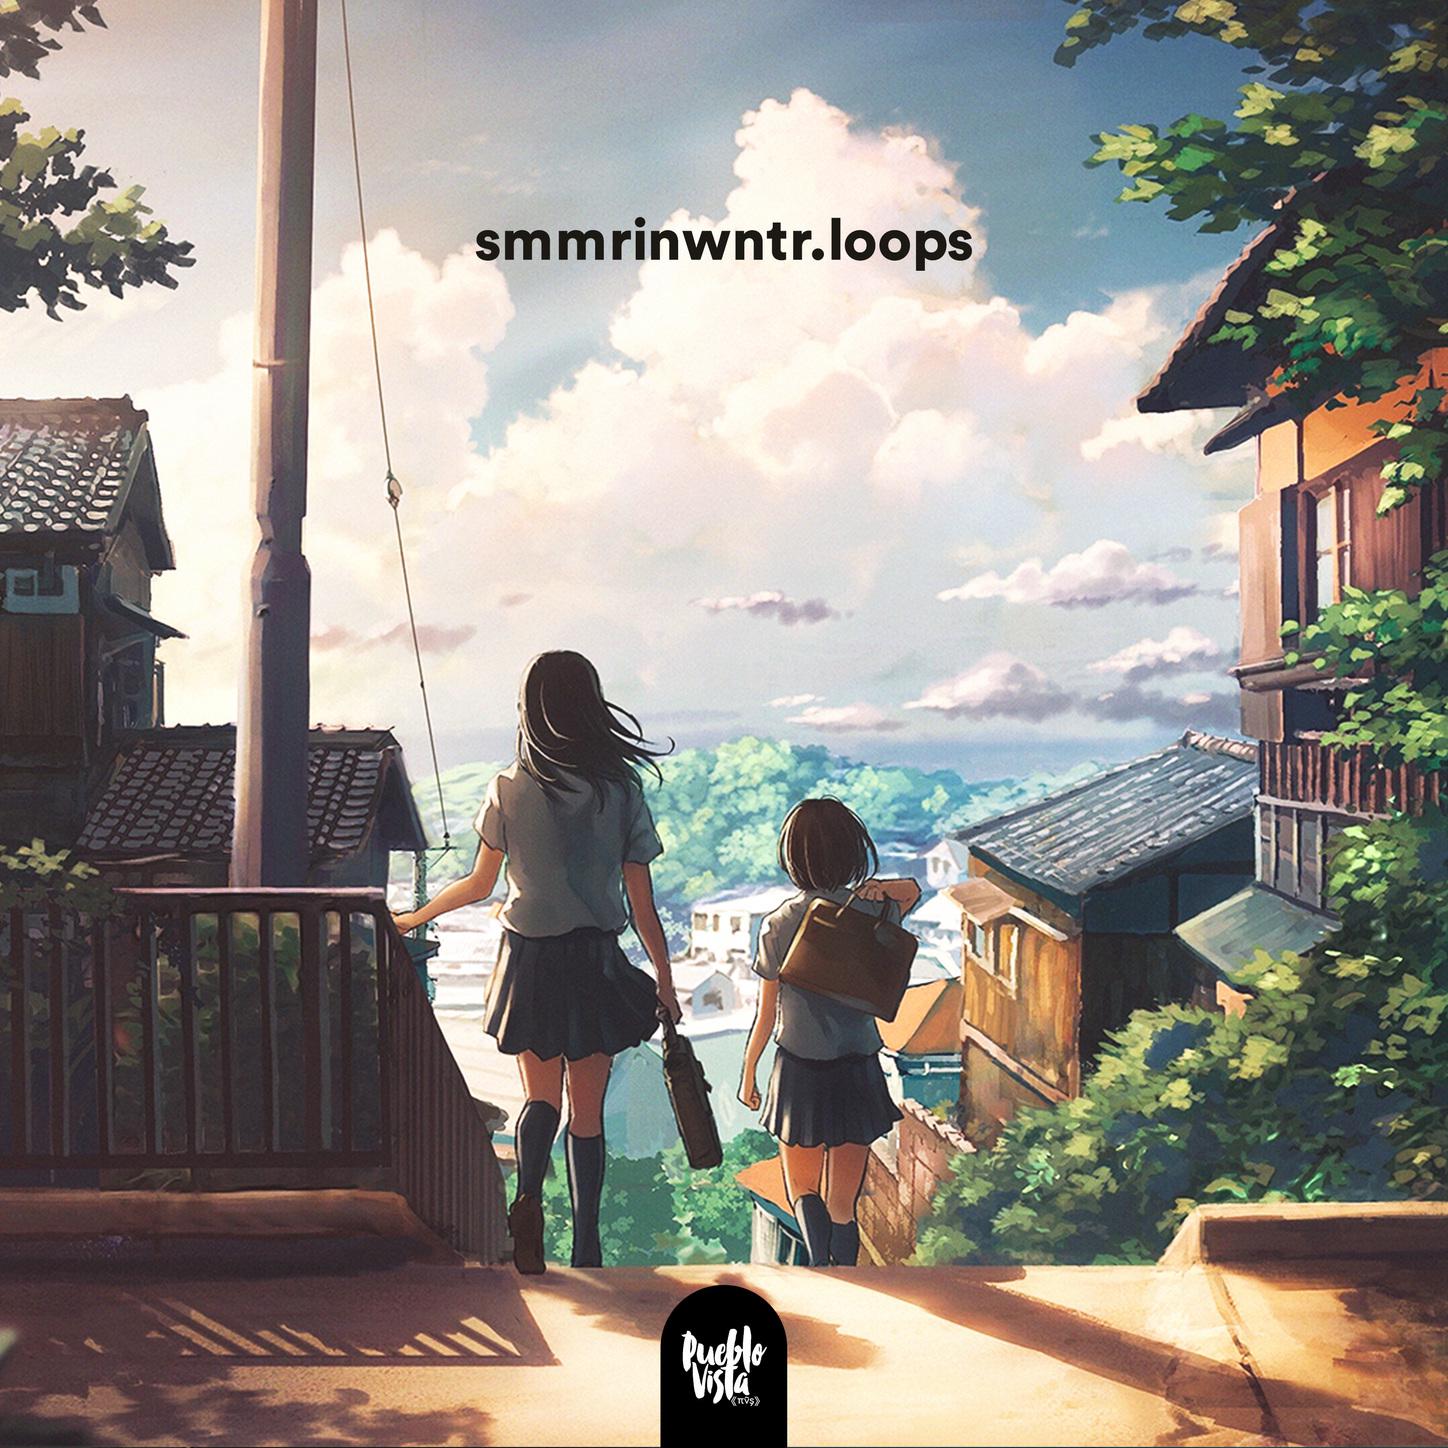 smmrinwntr.loops